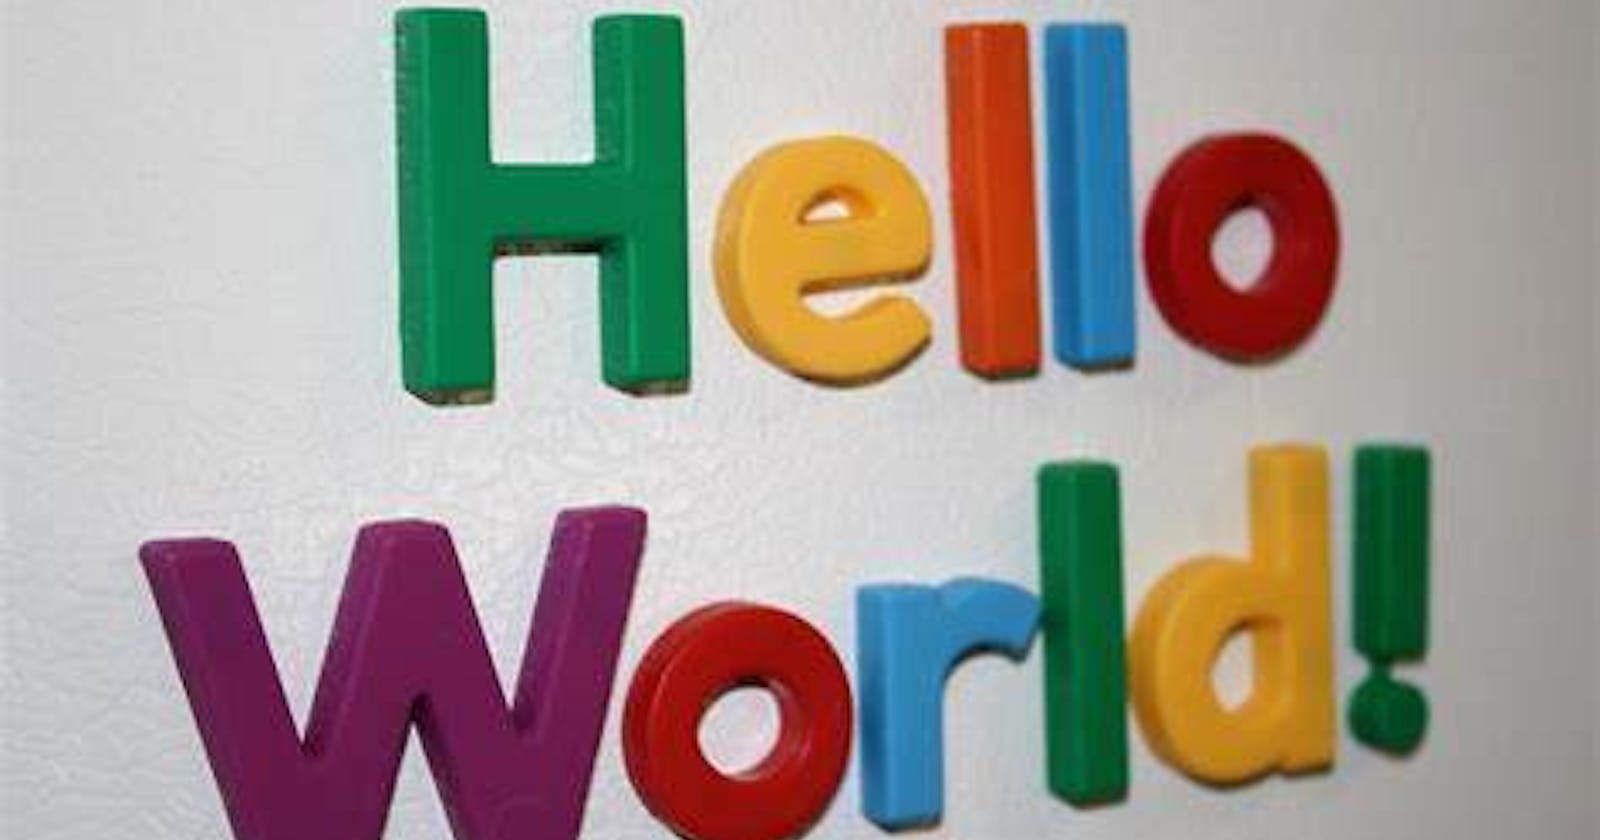 Why Do We Start Learning A Programming Language With "HELLO WORLD"